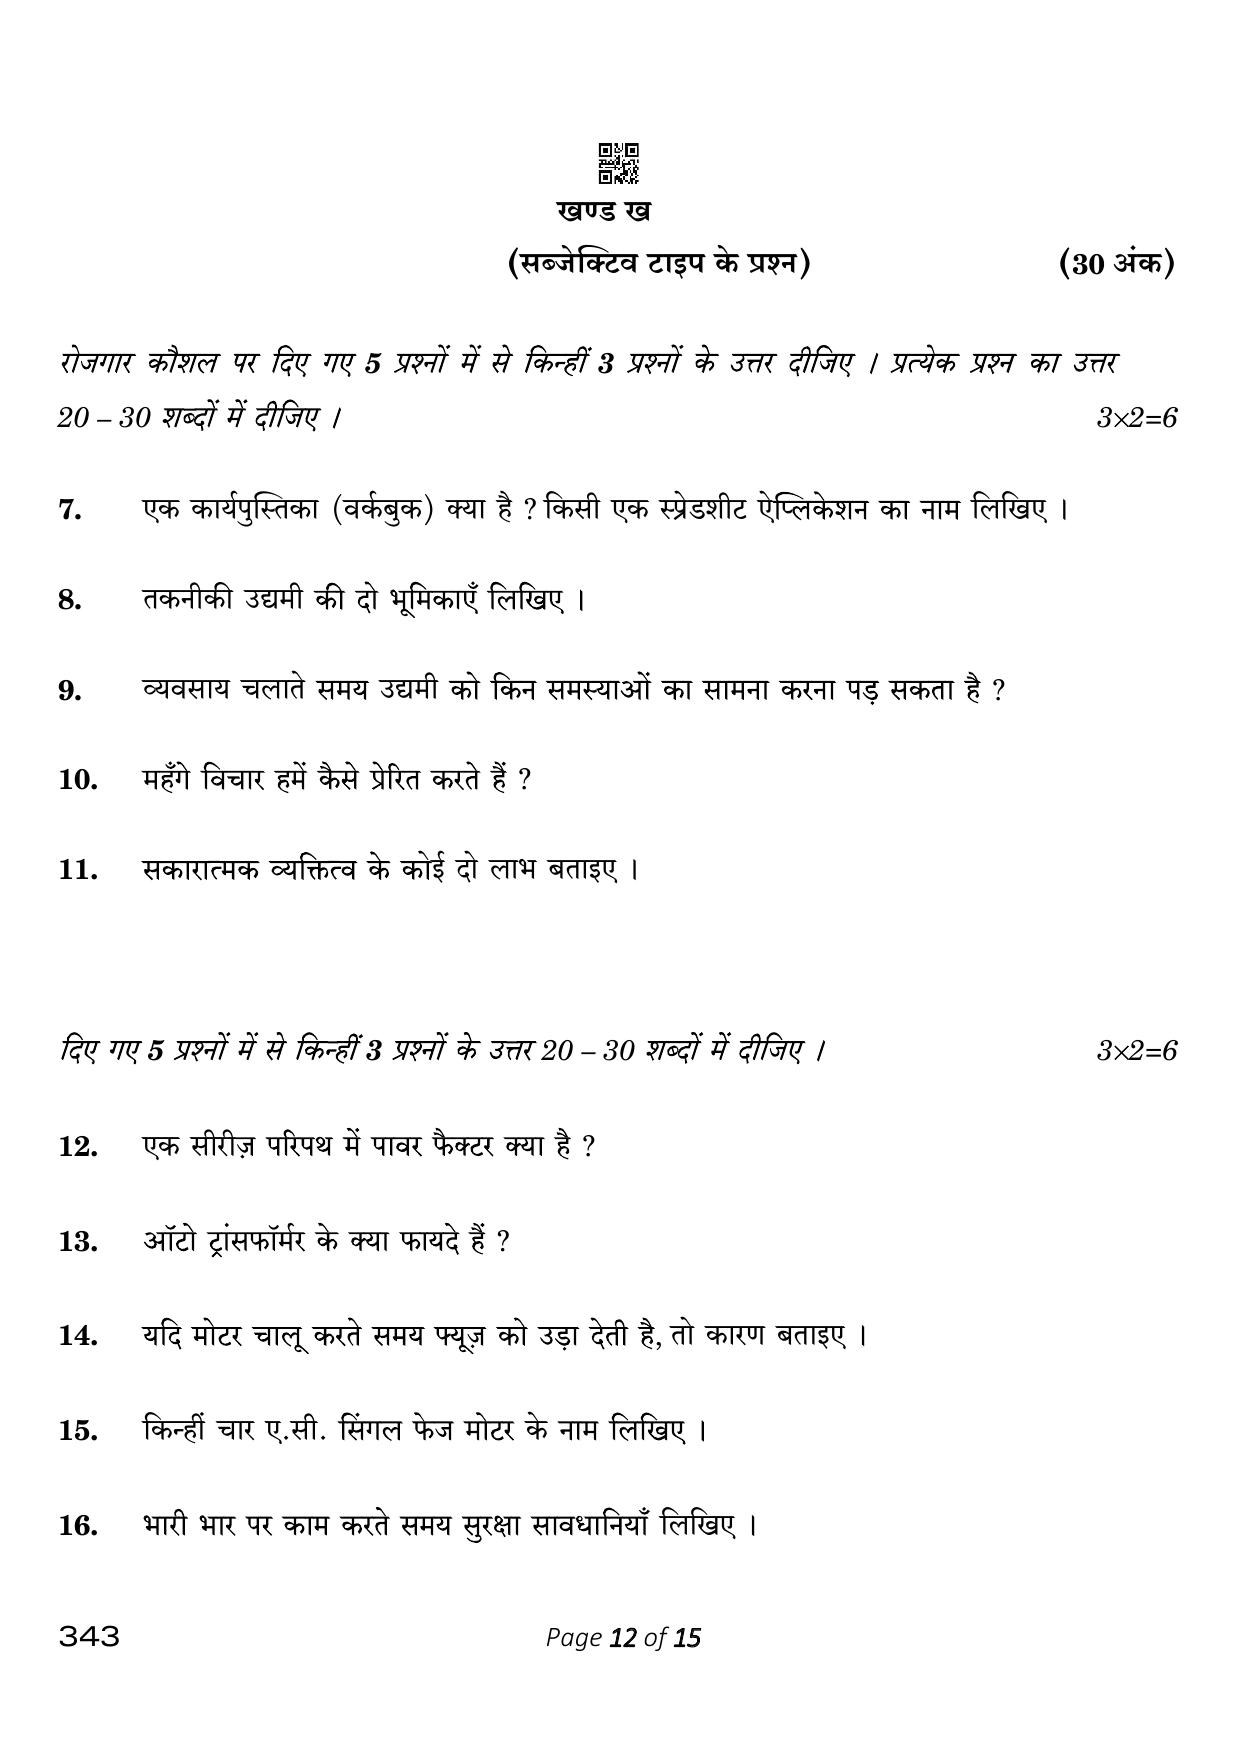 CBSE Class 12 343_Electrical Technology 2023 Question Paper - Page 12